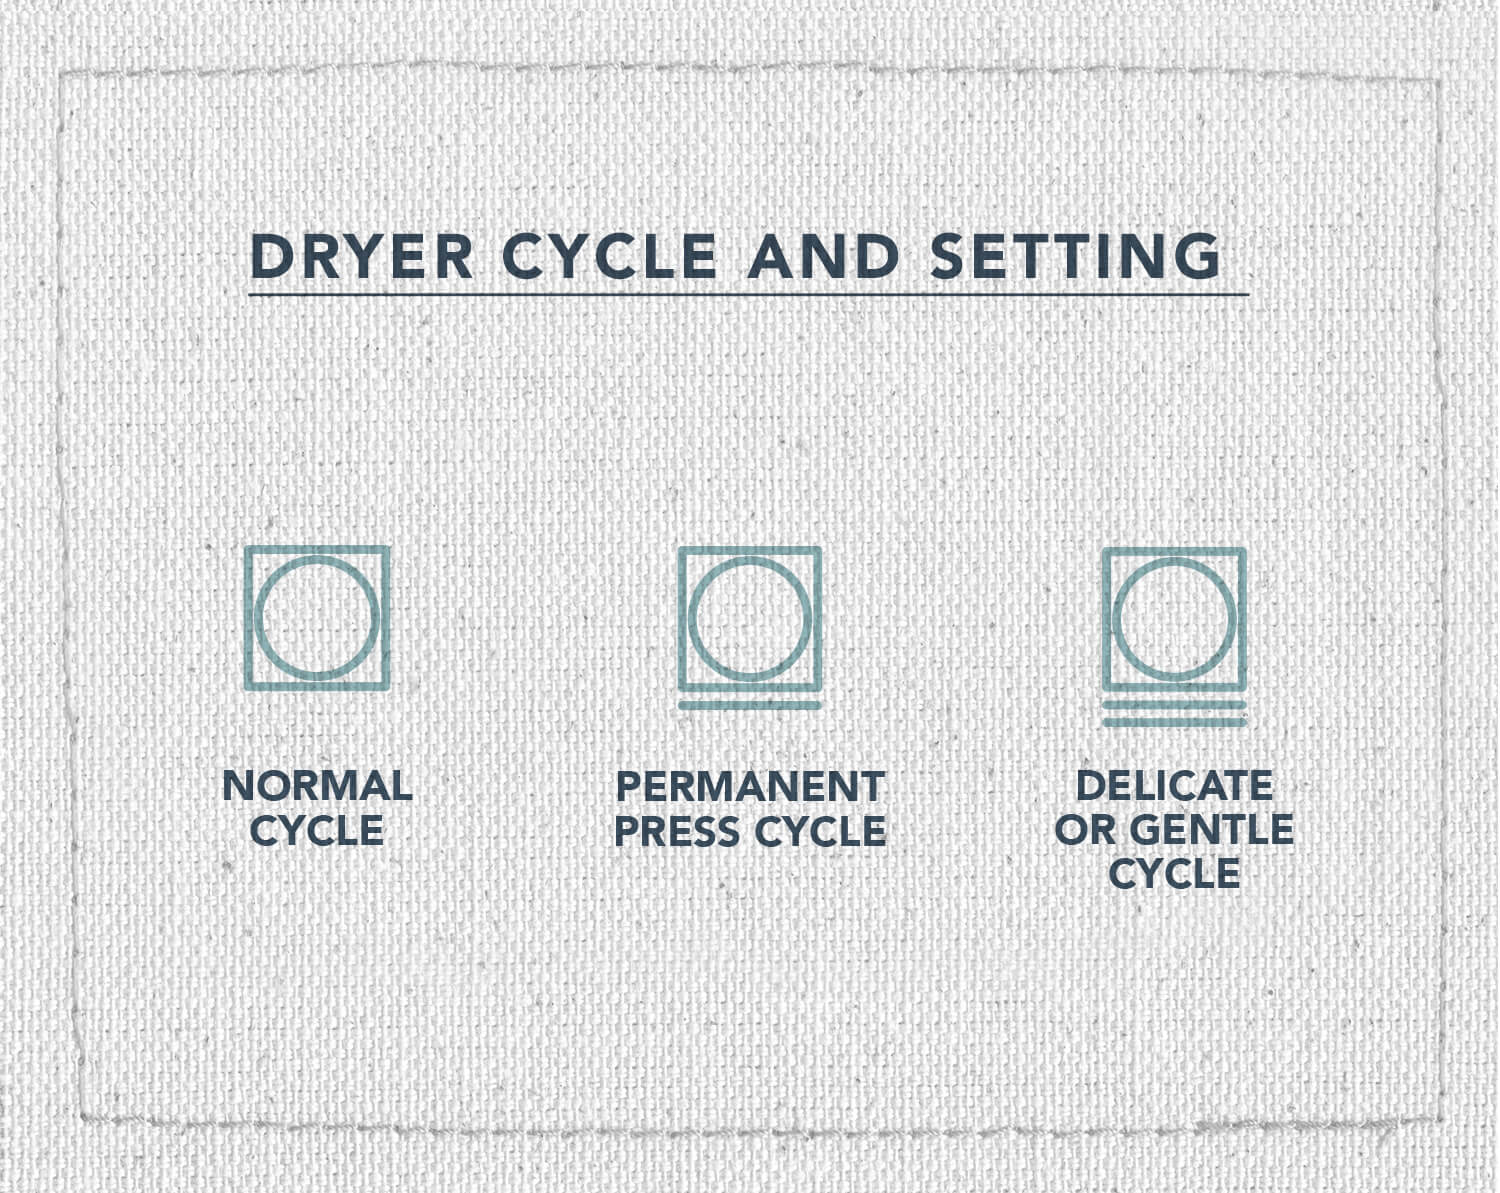 An infographic of three laundry care symbols depicting which symbols mean to run a normal cycle, permanent press cycle, or a delicate or gentle cycle